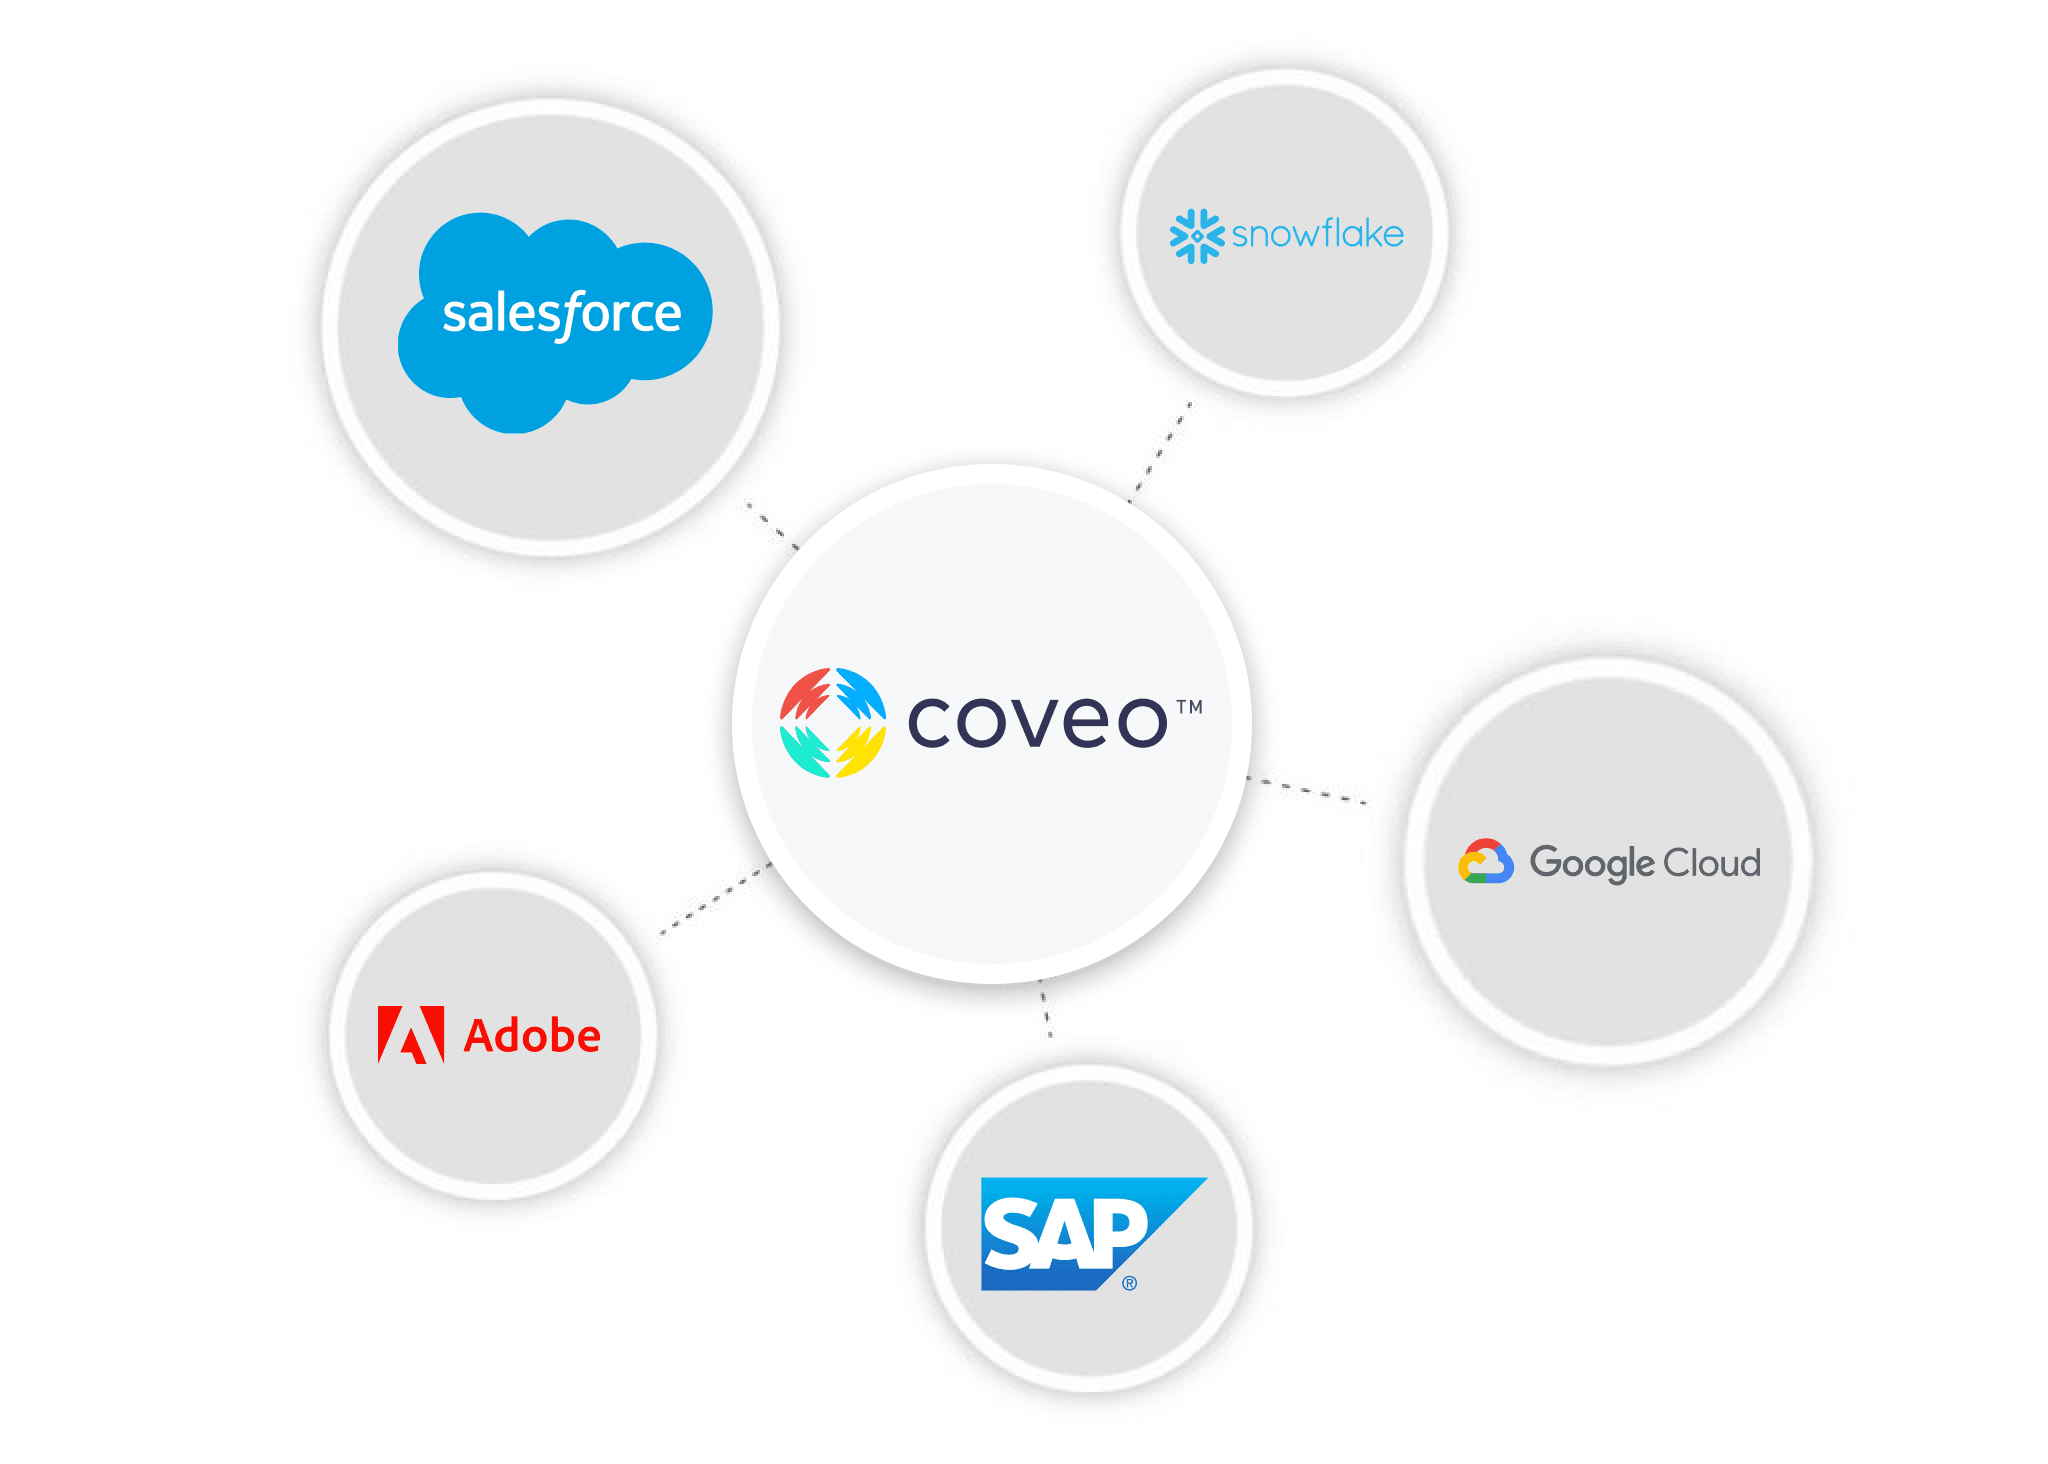 With more than 50 integrations, Coveo connects with modern and legacy platforms alike.